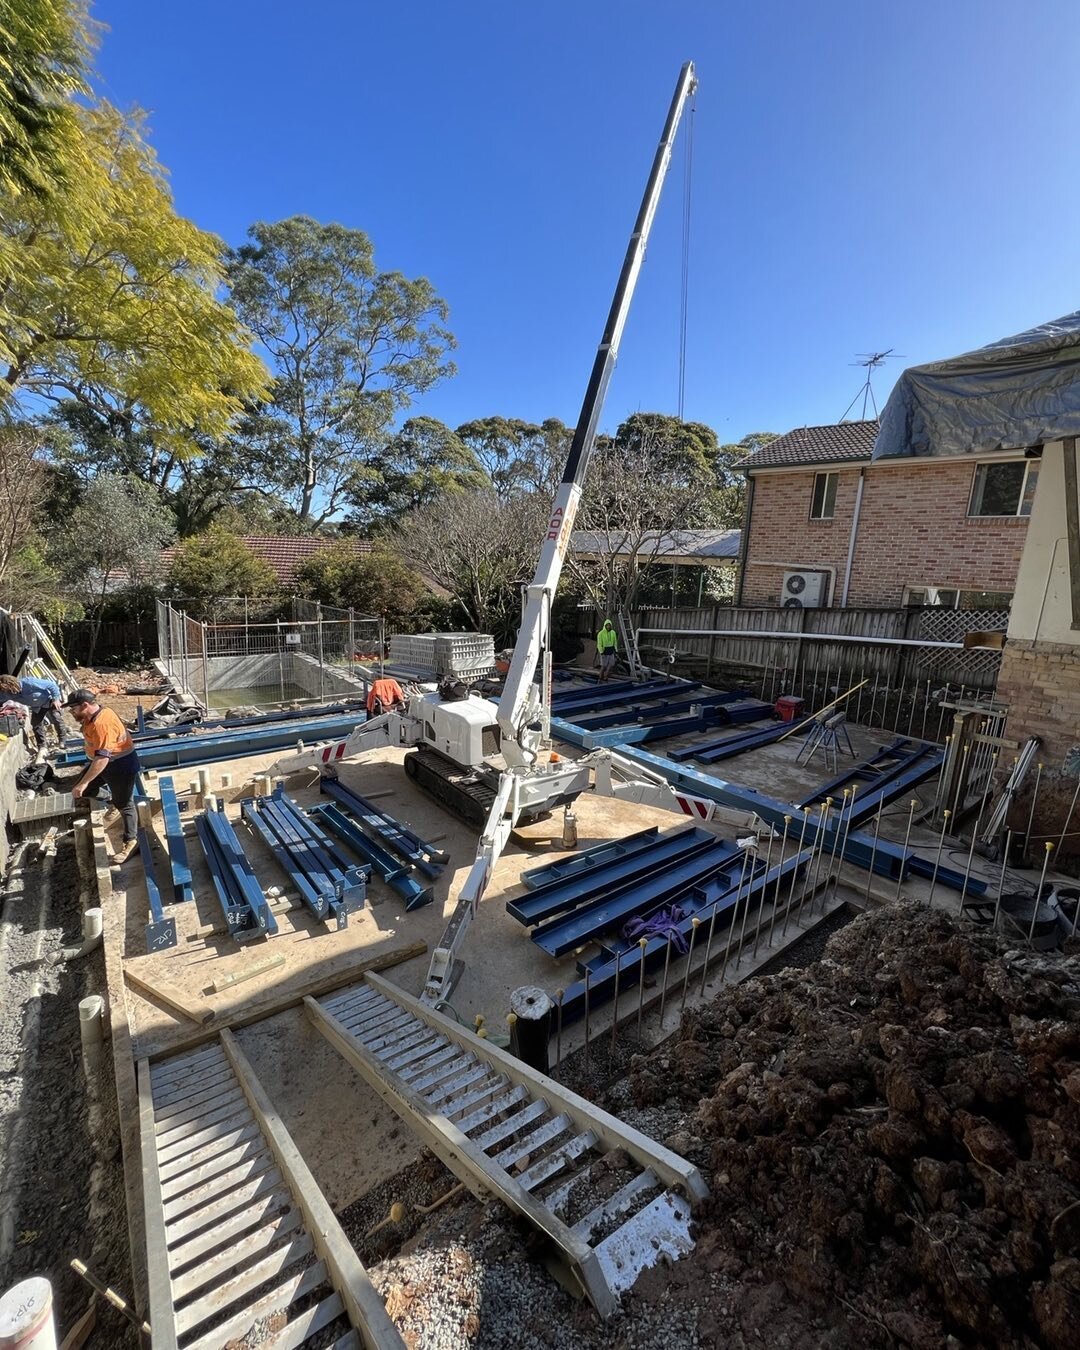 CHATSWOOD 
Very exciting to see the structural steel get installed this week. Milestone in the project.
Thanks @foreshoreengineering @thompson_rigging @sharpe_build
.
.
.
.
.
#sharpebuild #engineering #structralsteel
#customprojects #sitemanagers #pr